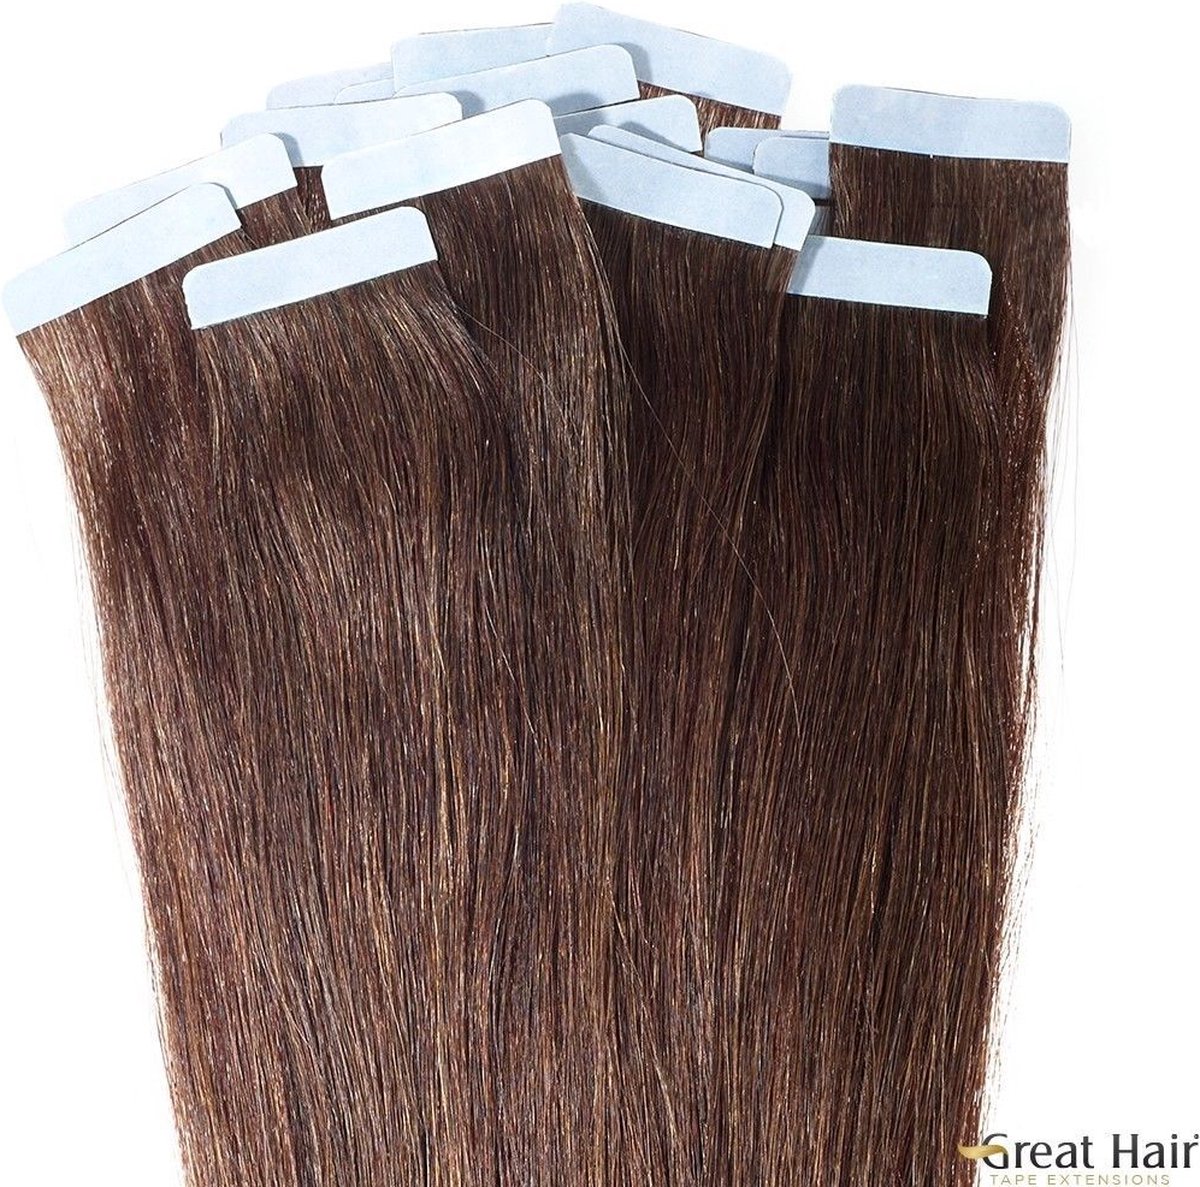 Great Hair Extensions Tape Extensions Grey Ash #1003 50cm